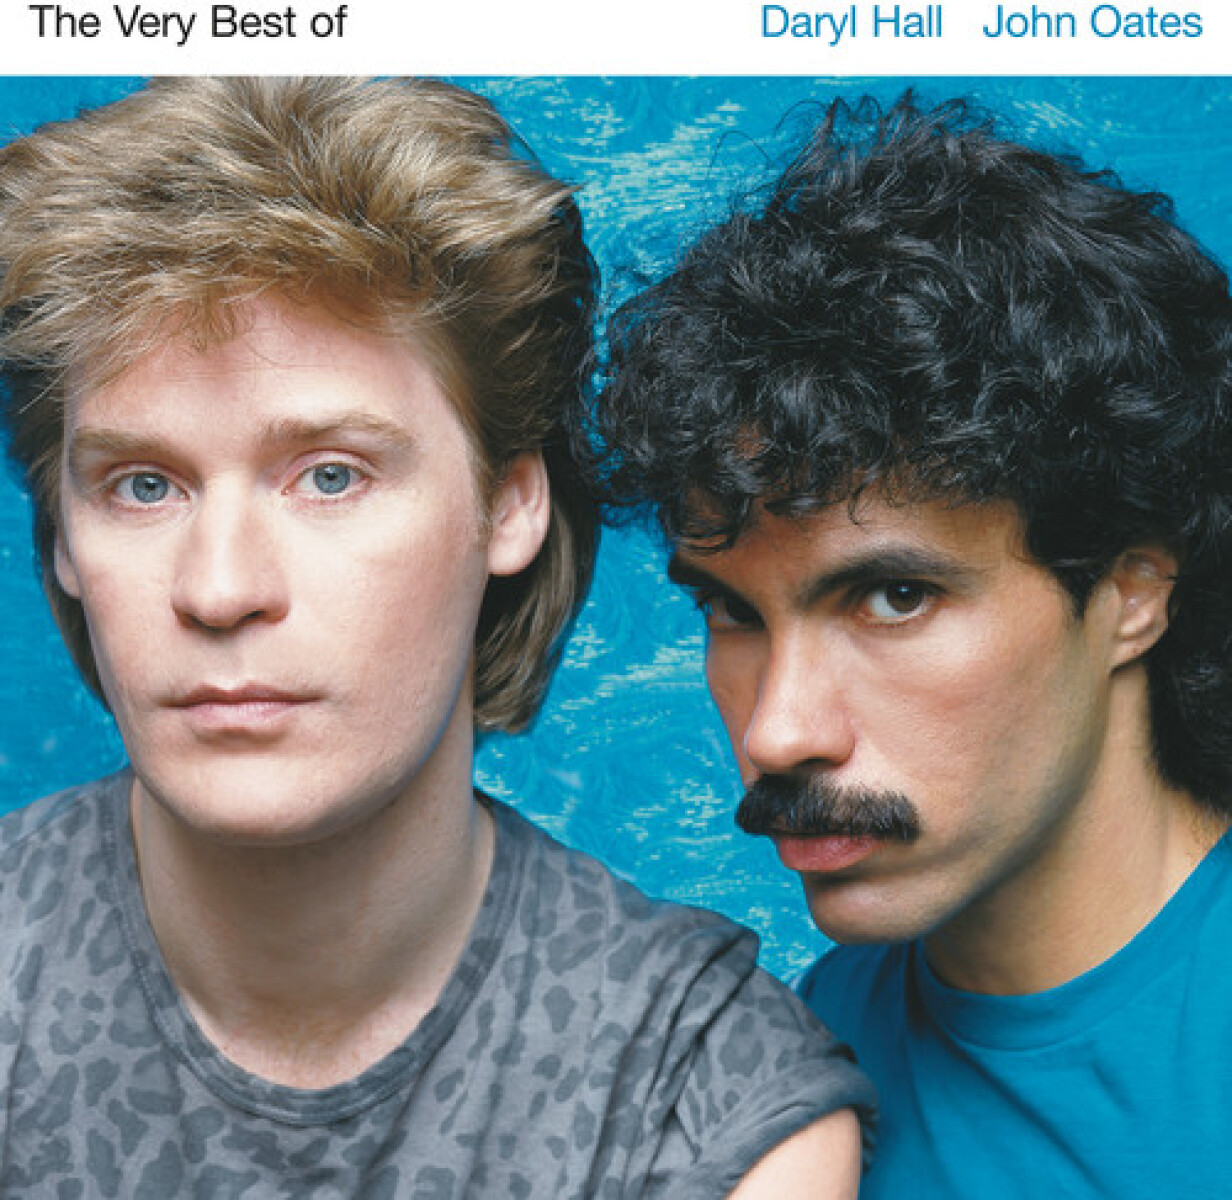 Daryl Hall And John Oates The Very Best Of - Vinilo 